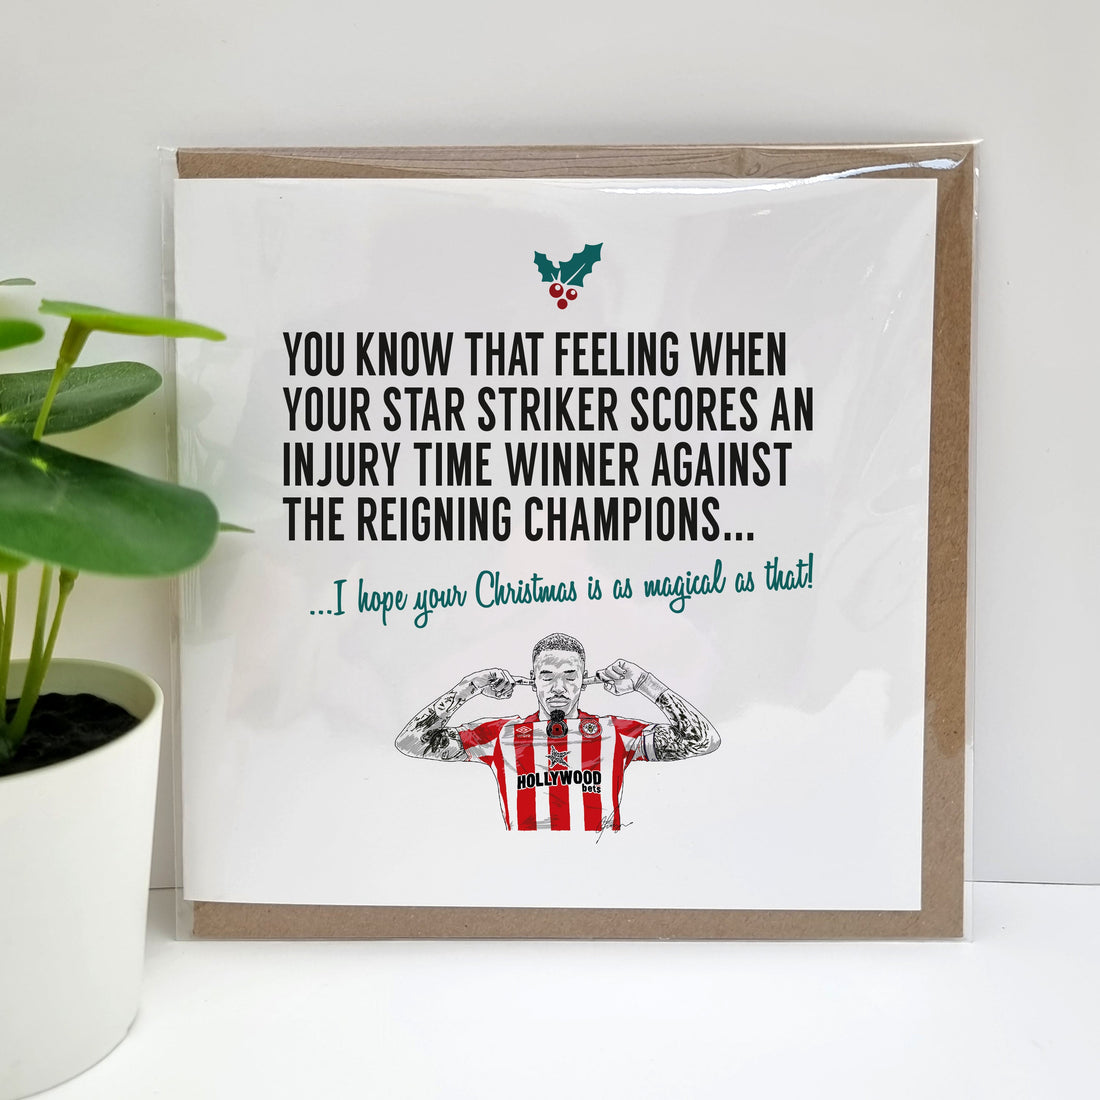 A handmade Brentford Football fan Christmas Card celebrating the win over Man City on 12 November 22. Perfect for Brentford fans. Featuring hand drawn illustration of Ivan Toney.  Card reads: You know that feeling when your tart striker scores an injury time winner against the reigning champions... I hope your Christmas is as magical as that!